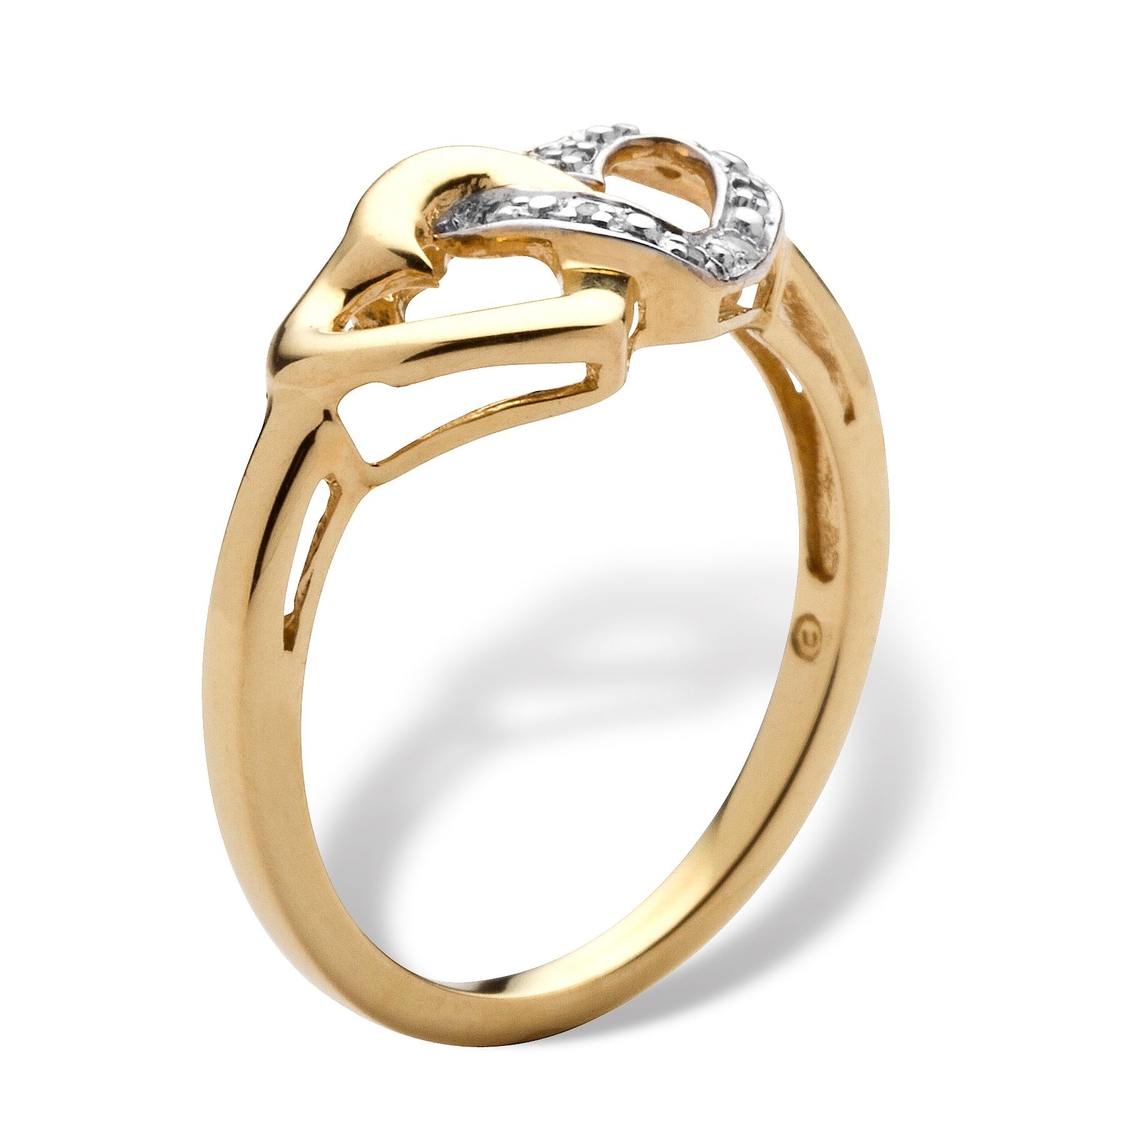 Diamond Accent Interlocking Heart Promise Ring in 18k Gold-plated Sterling Silver - Image 2 of 5